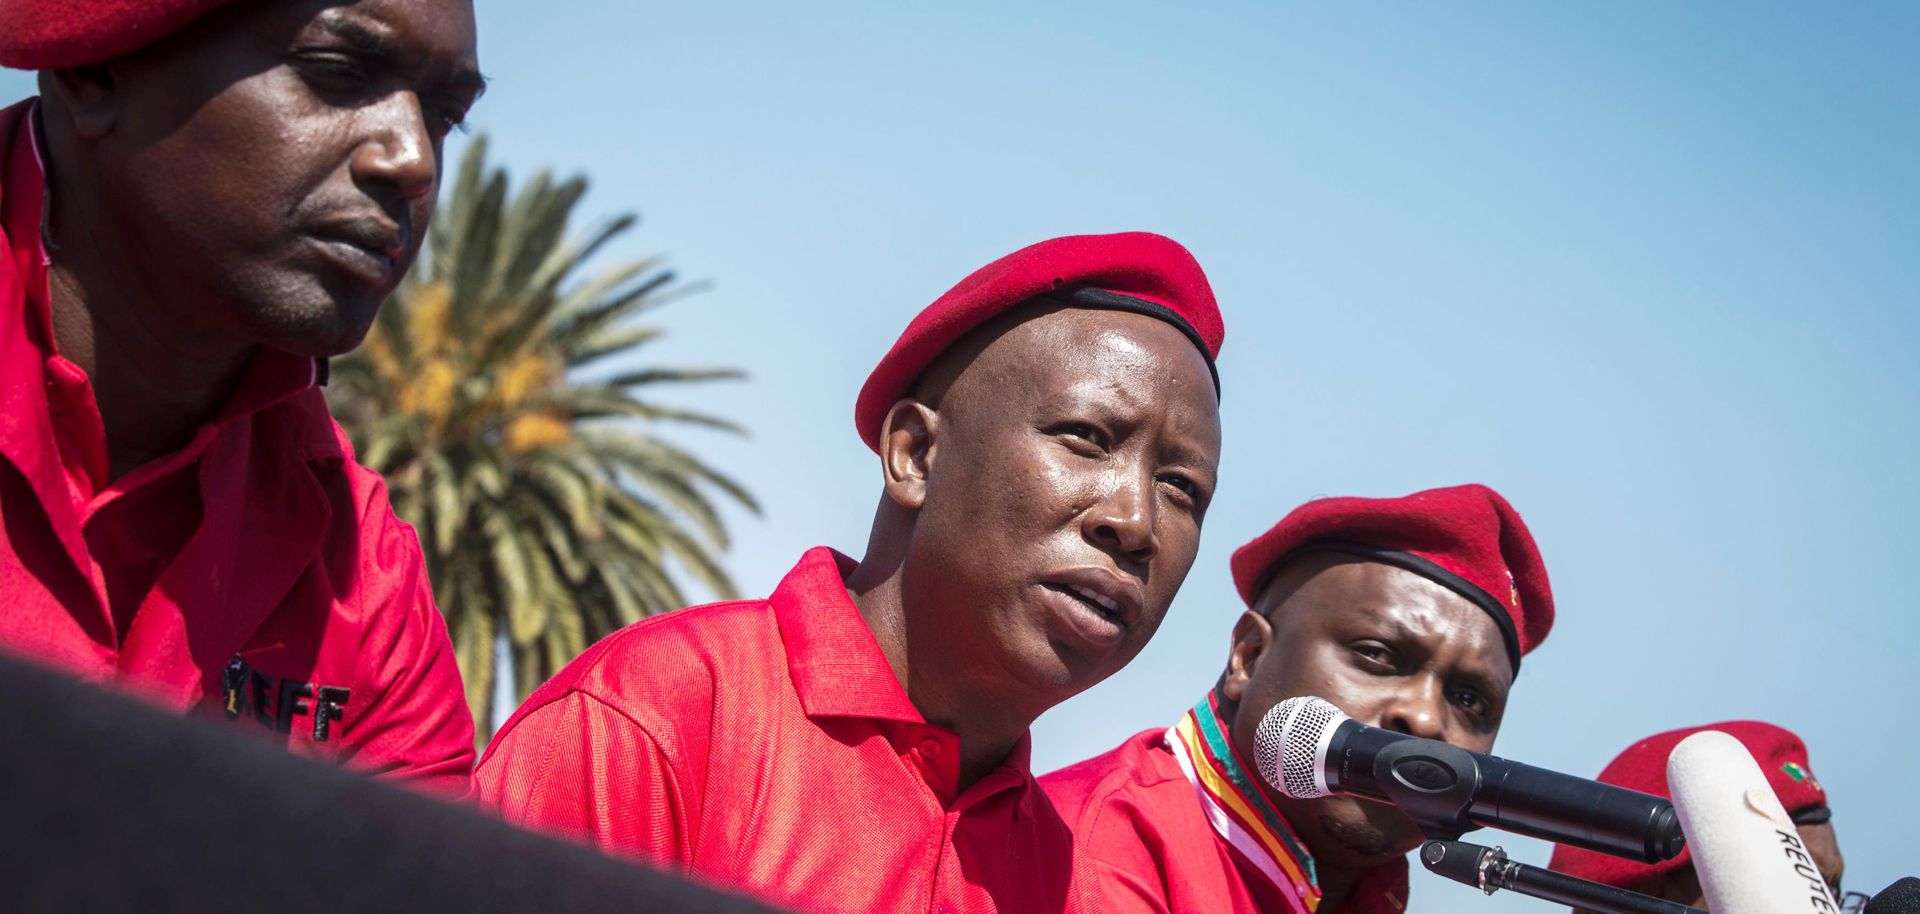 Julius Malema (C) announces on Aug. 17 that his Economic Freedom Fighters party will not enter into any governing coalitions after municipal elections in several South African cities left no party with a majority.